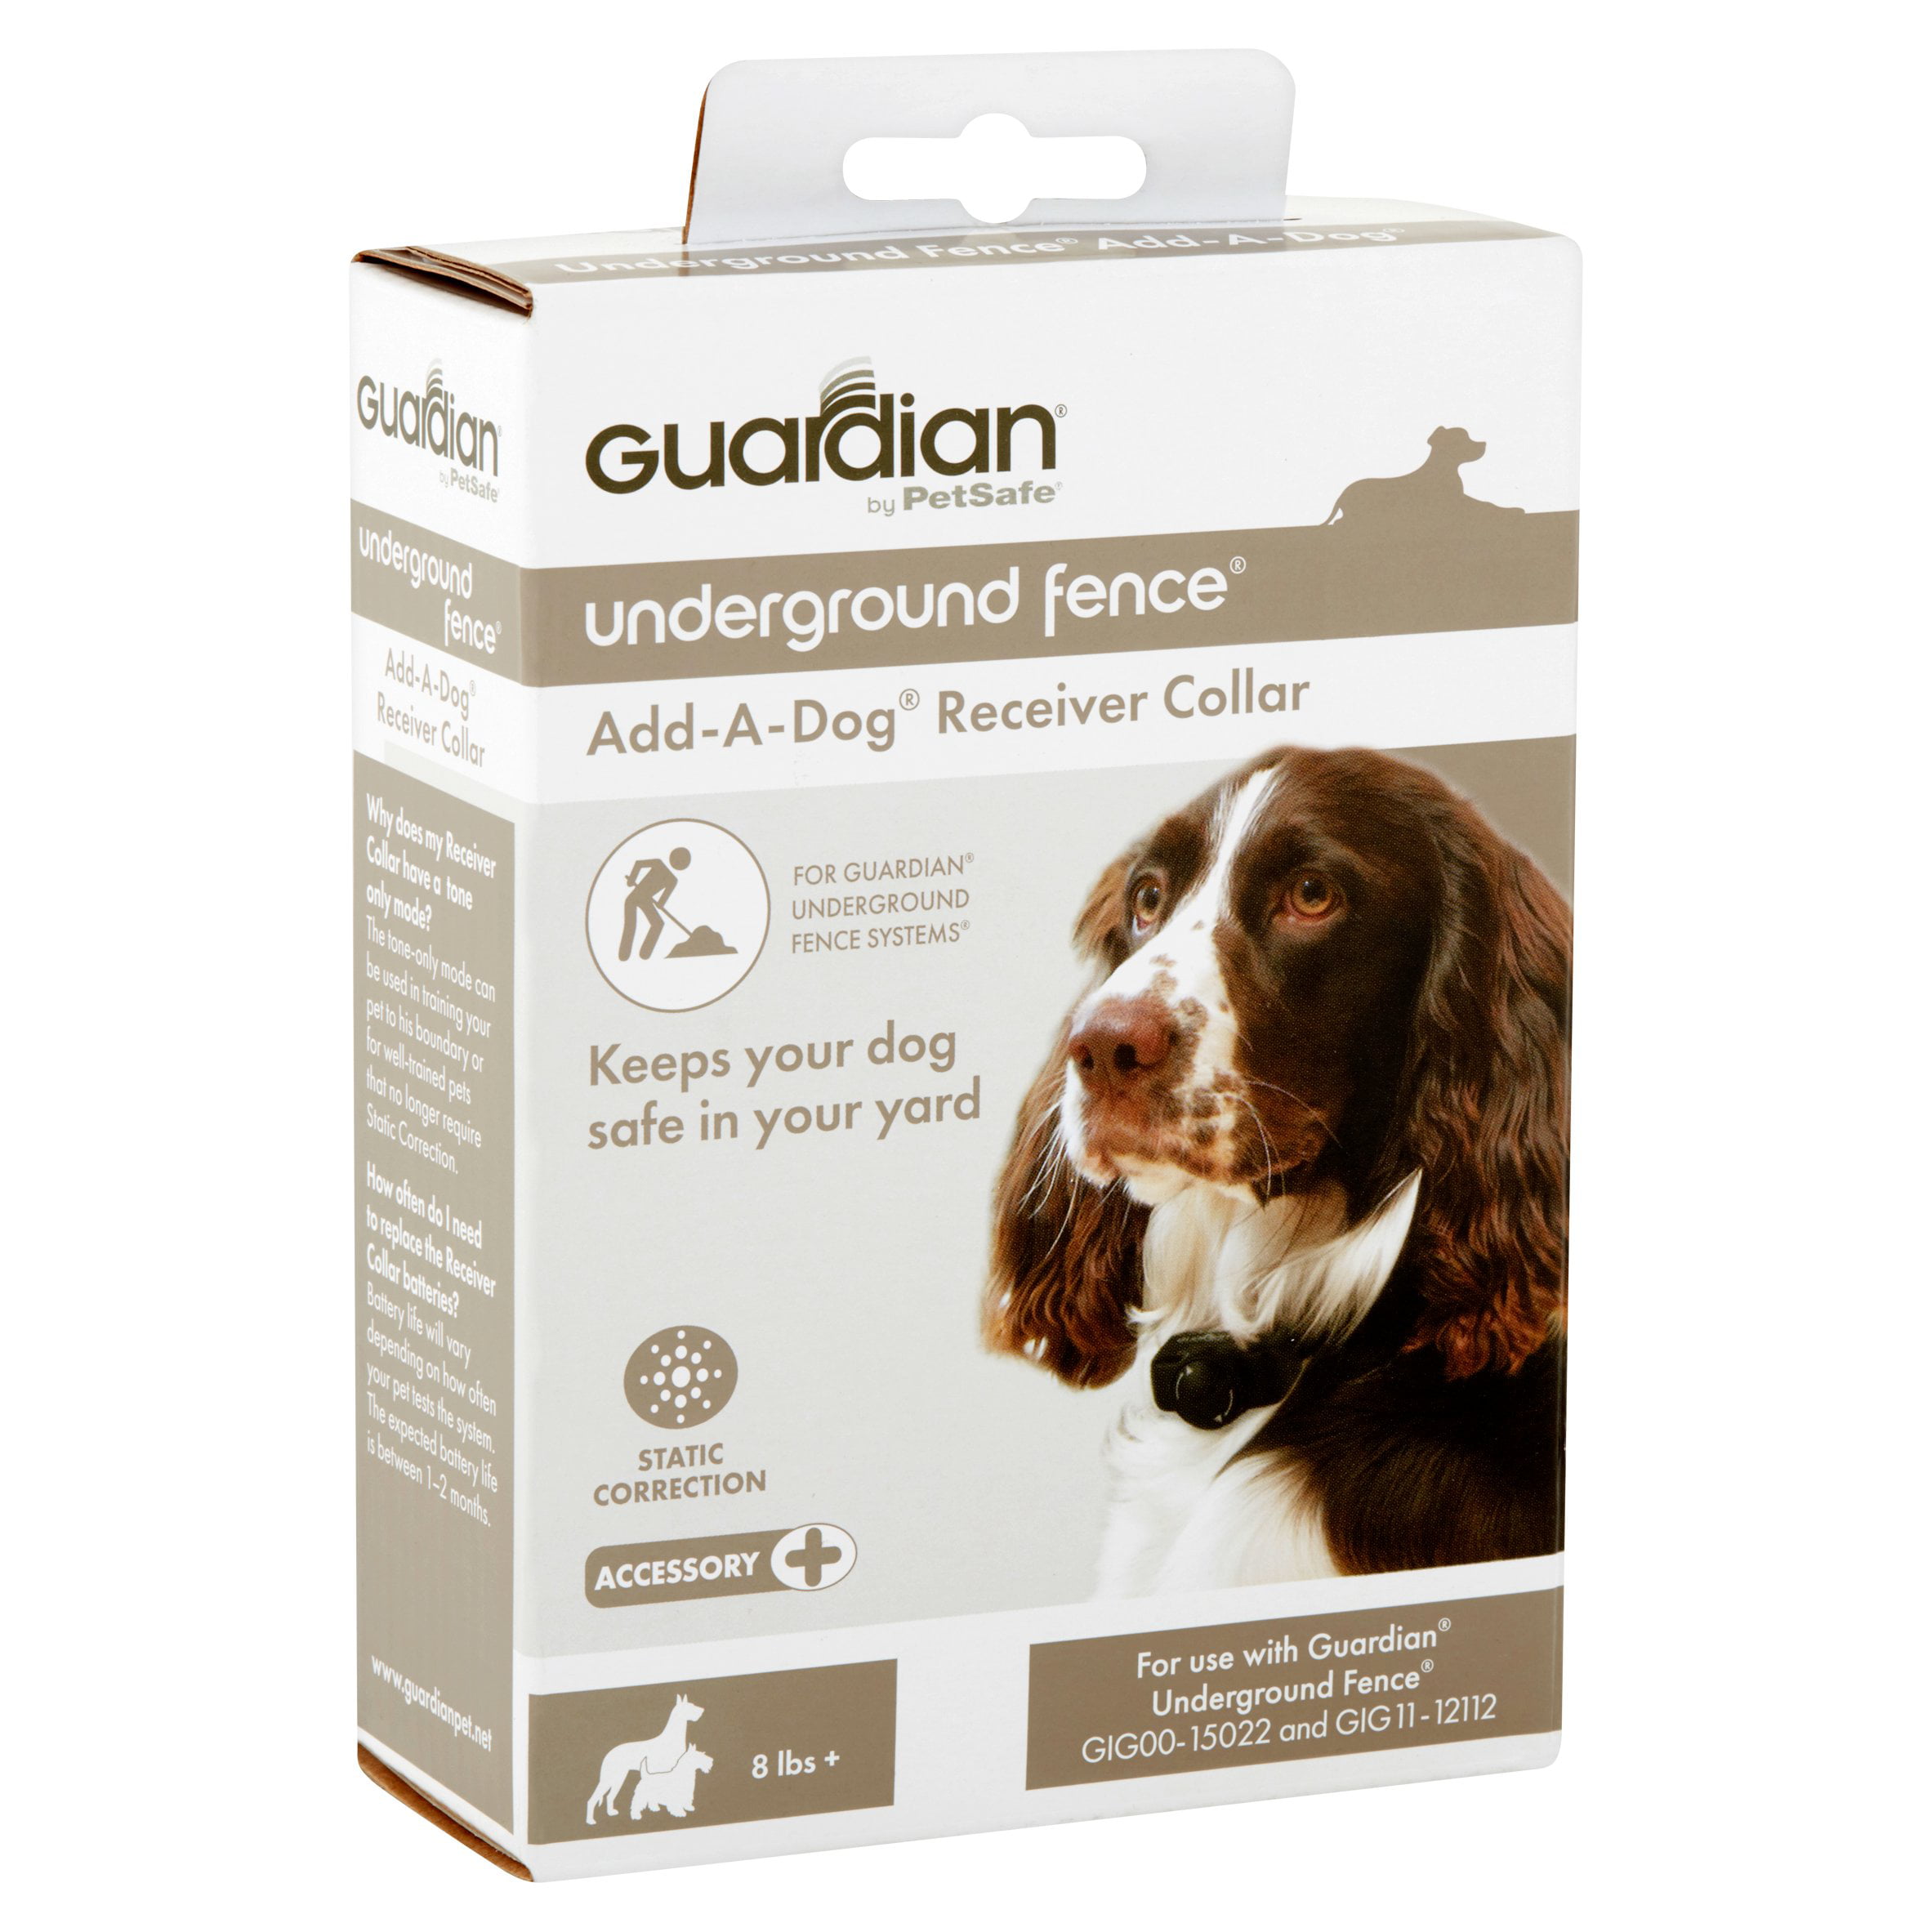 Guardian By Petsafe In Ground Fence Receiver Collar Walmart Com Walmart Com,Smartphone Black And White Wallpaper Hd 1080p For Mobile